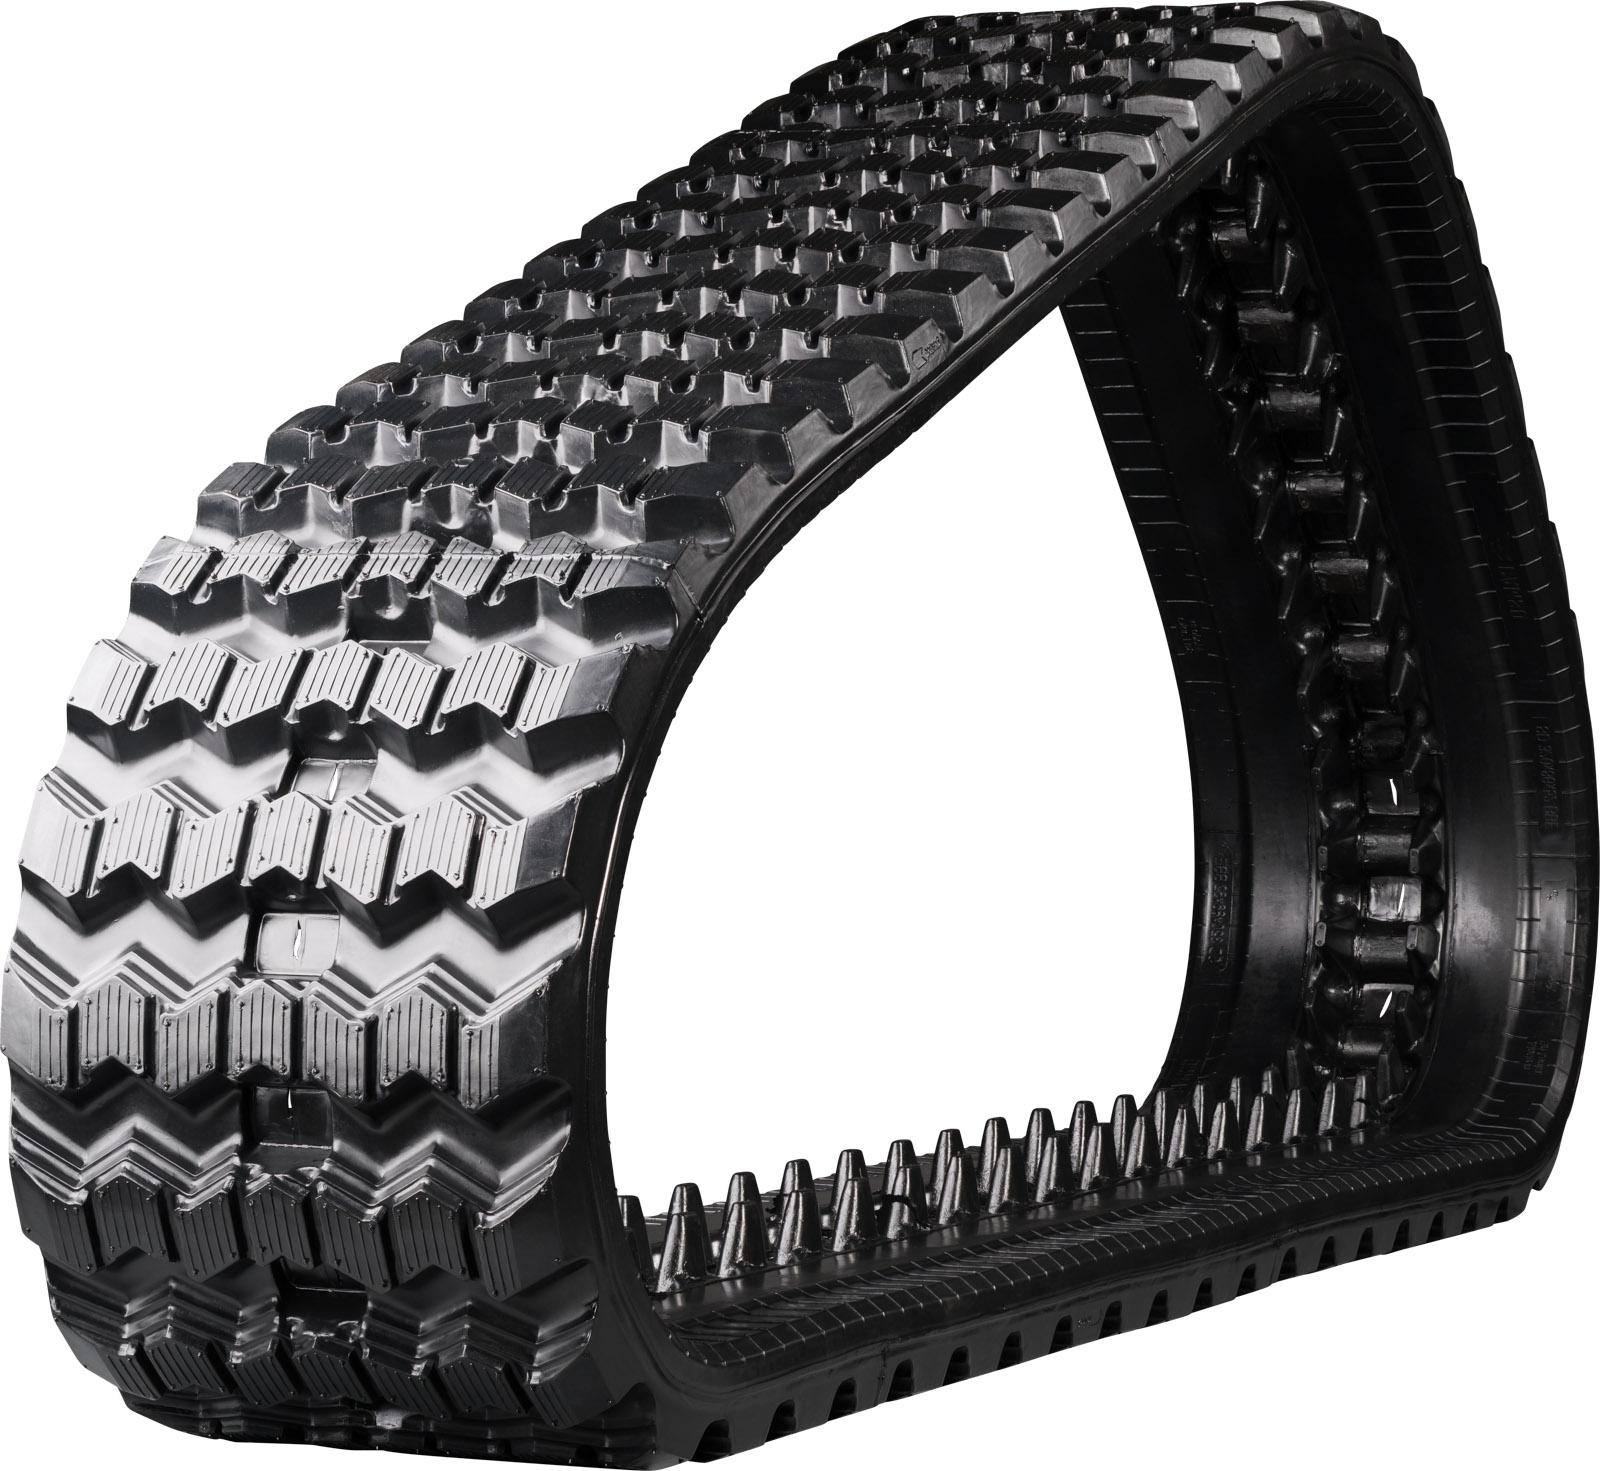 set of 2 13" camso heavy duty sawtooth pattern rubber track (320x86bx50)